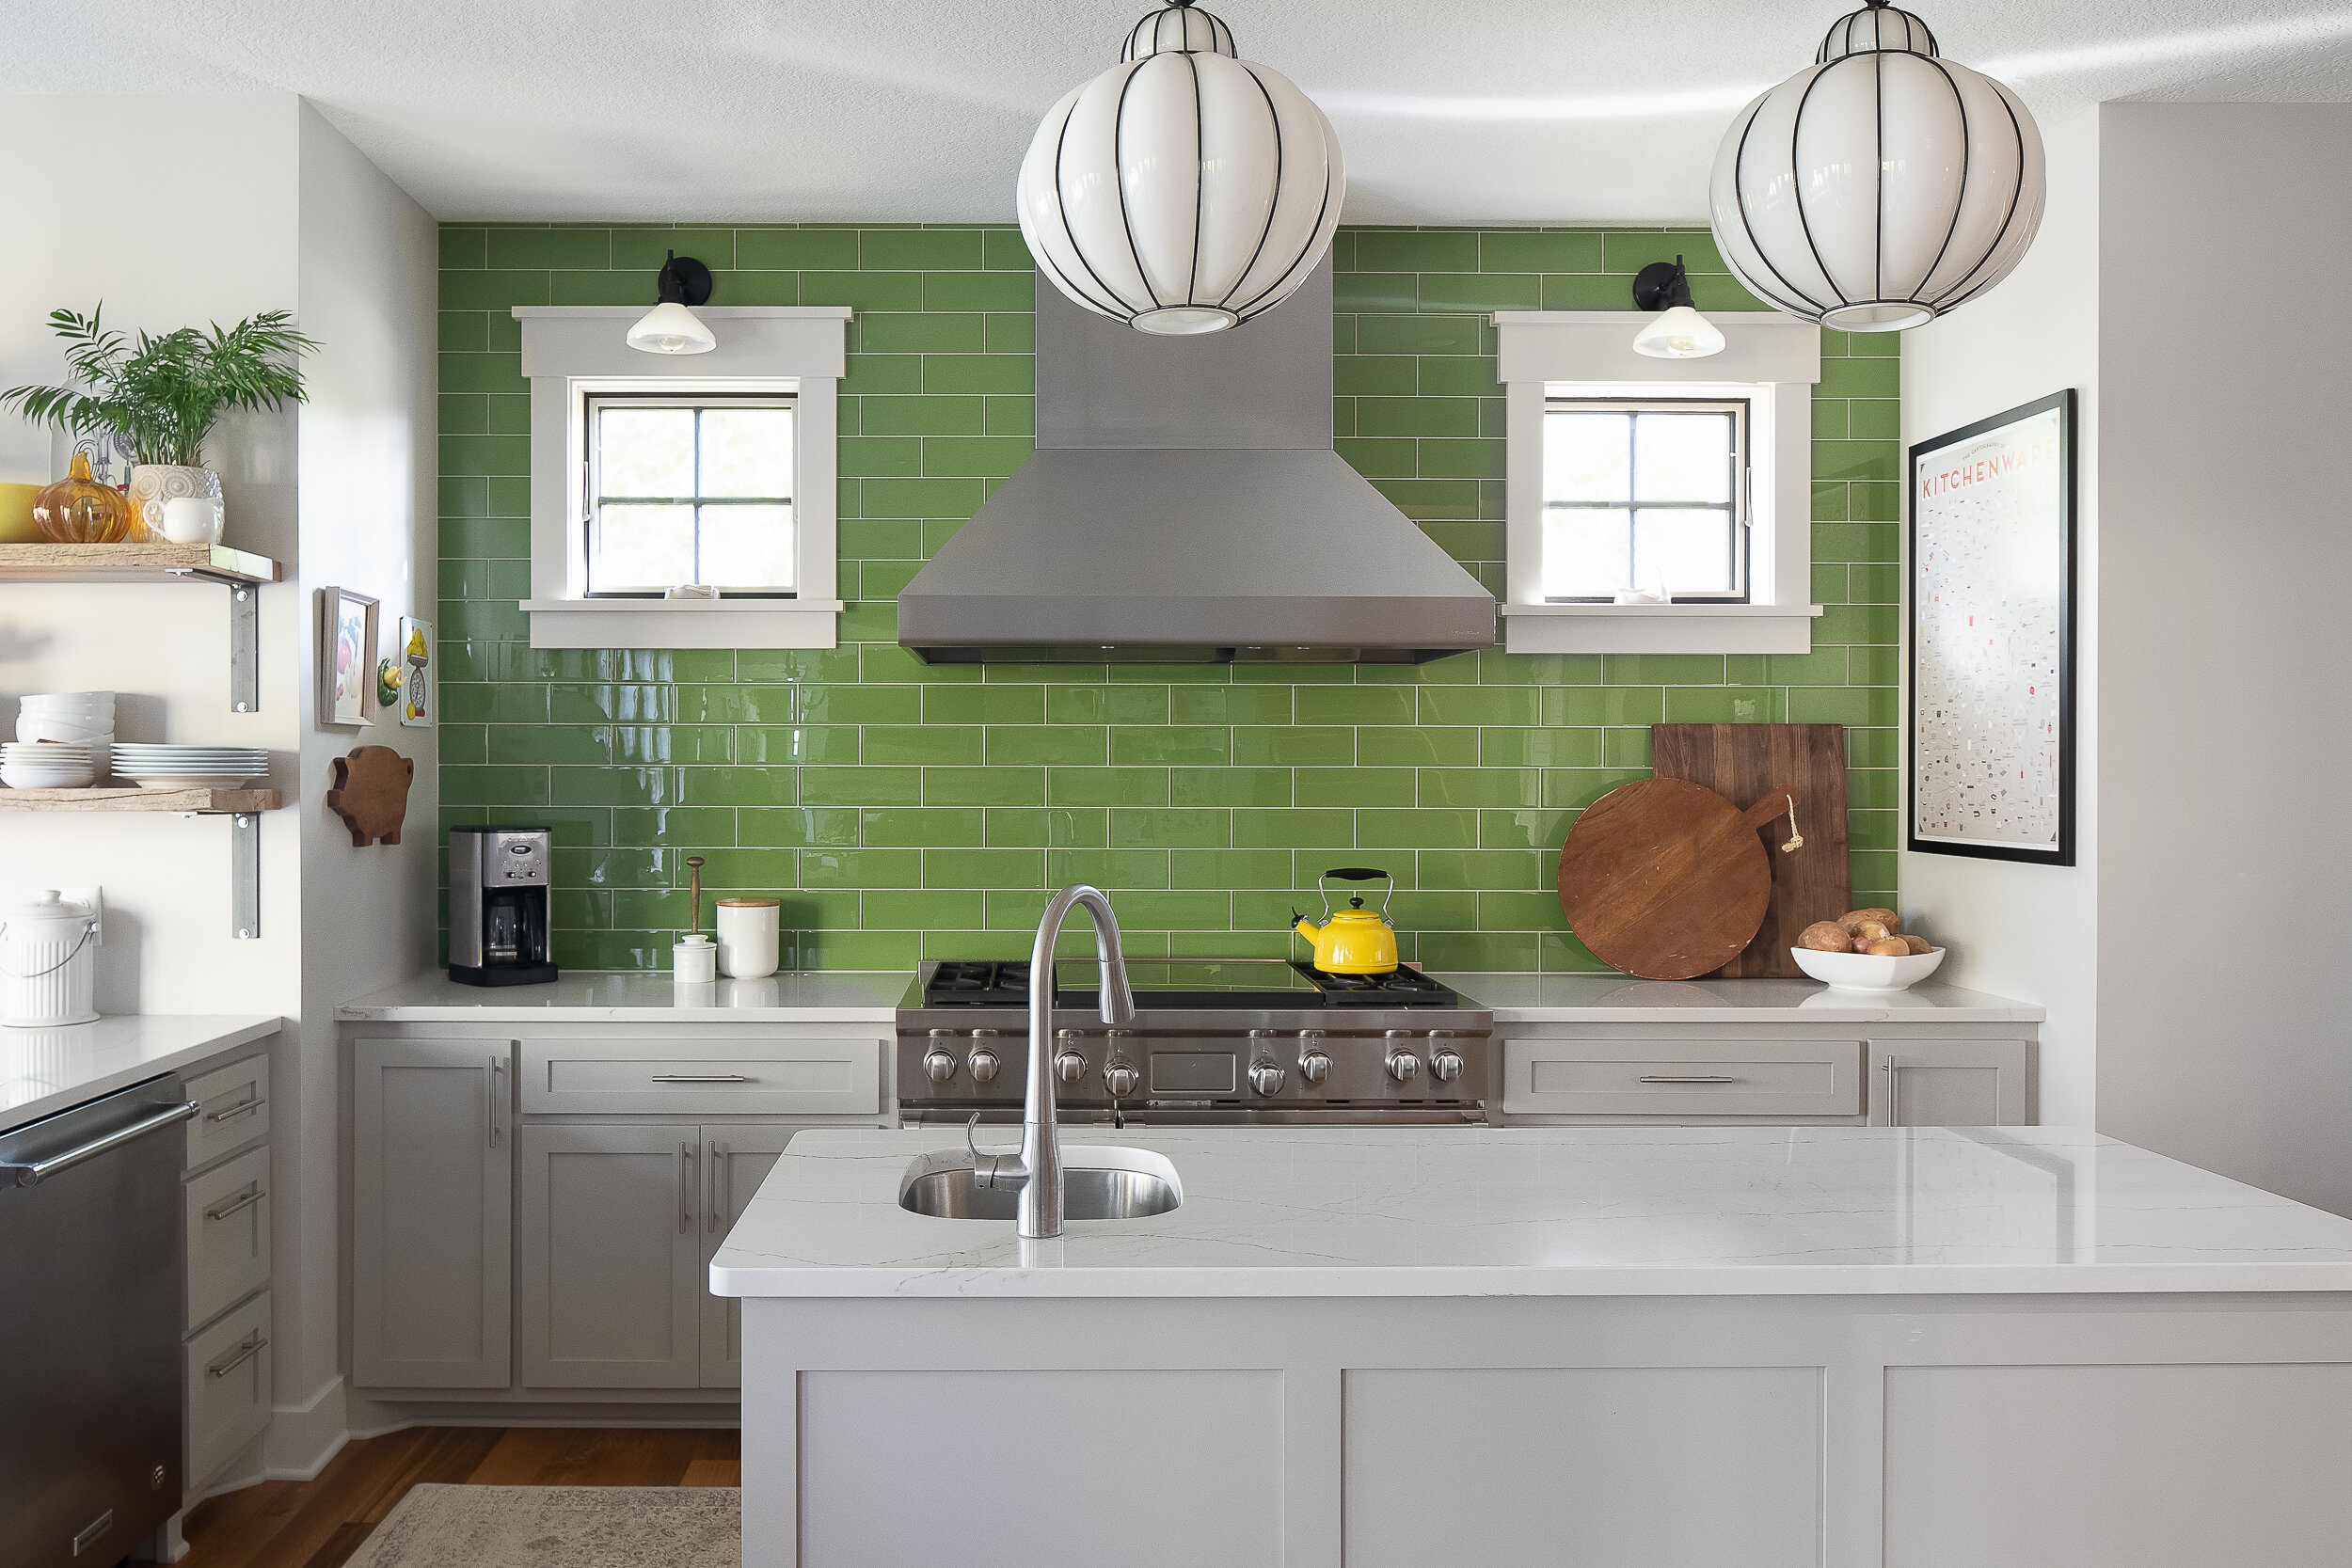 Interior design photography of a modern Kitchen with lime green subway tile